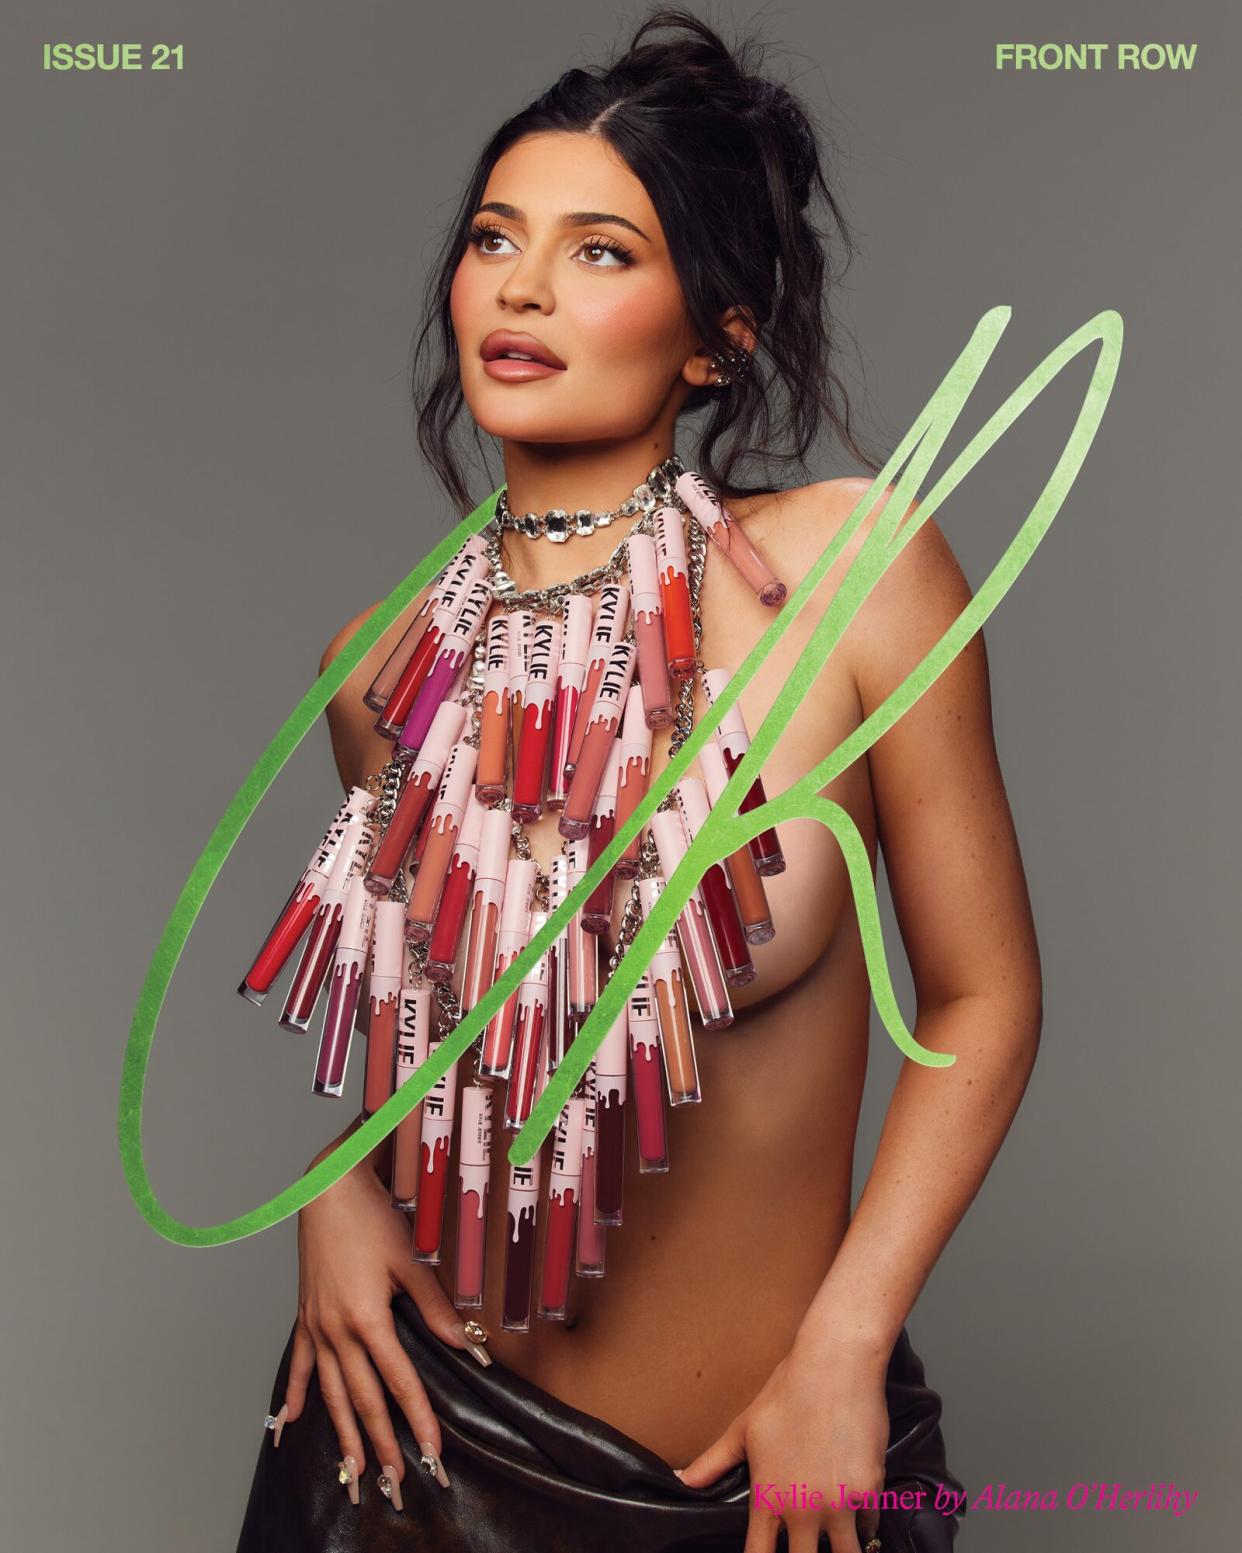 Kylie Jenners wears Kylie Lip Kit halter top for CR Fashion Book cover